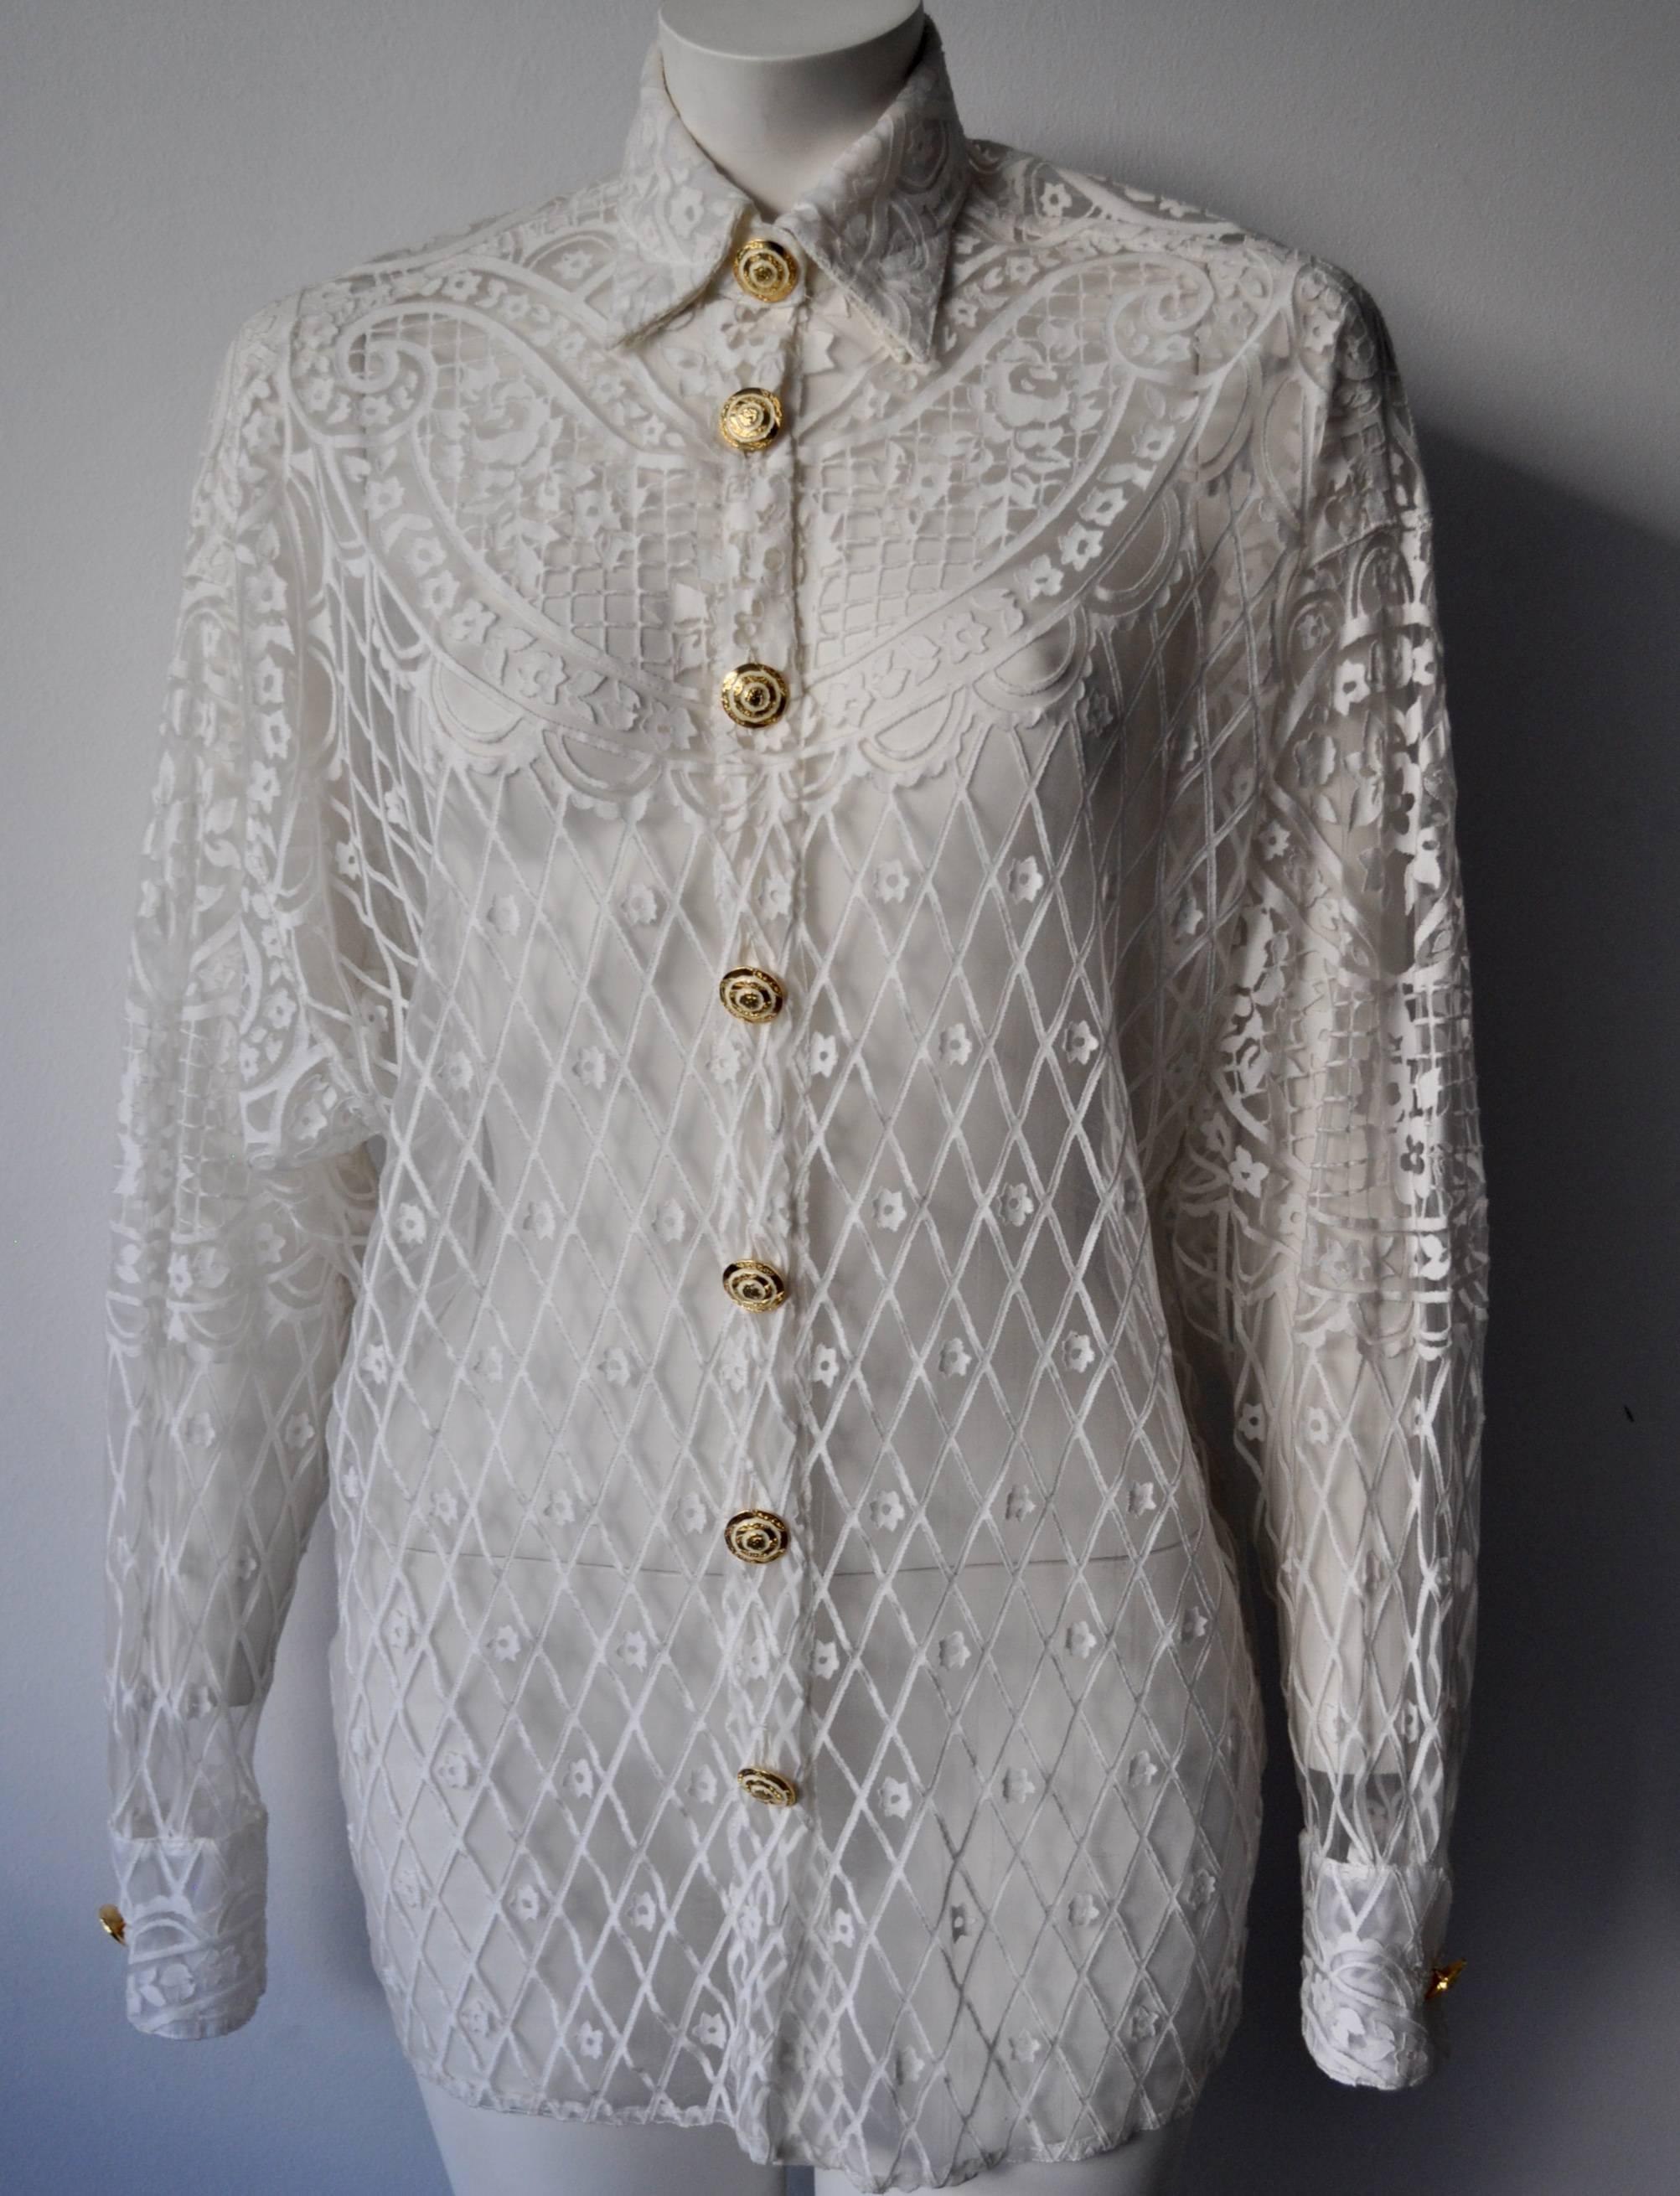 Eclectic Gianni Versace Couture Laser-Cut Sheer White Silk Shirt featuring prominent Gold gilt metal and white paste buttons from the provocative 
Punk Collection, Spring 1994.